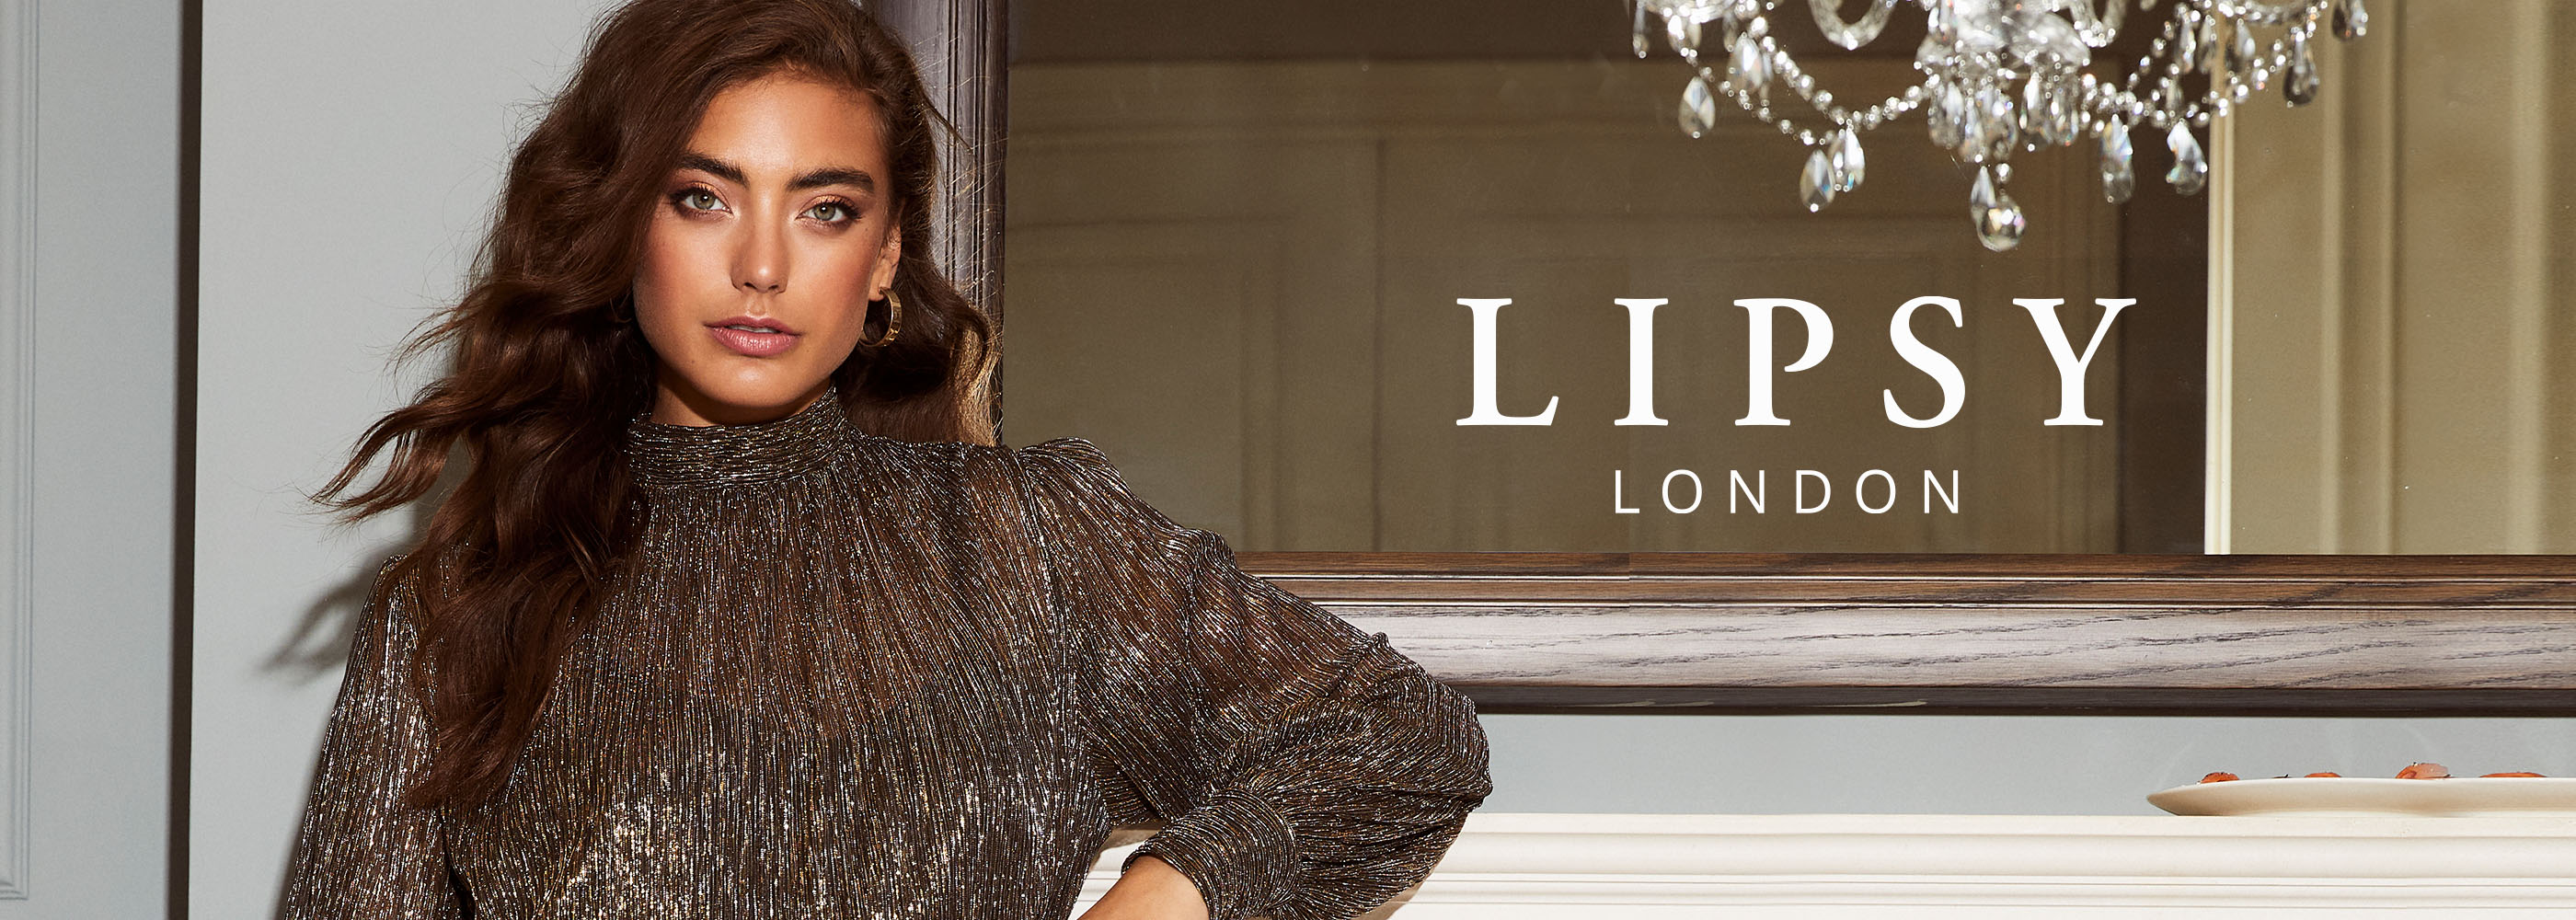 lipsy london new collection